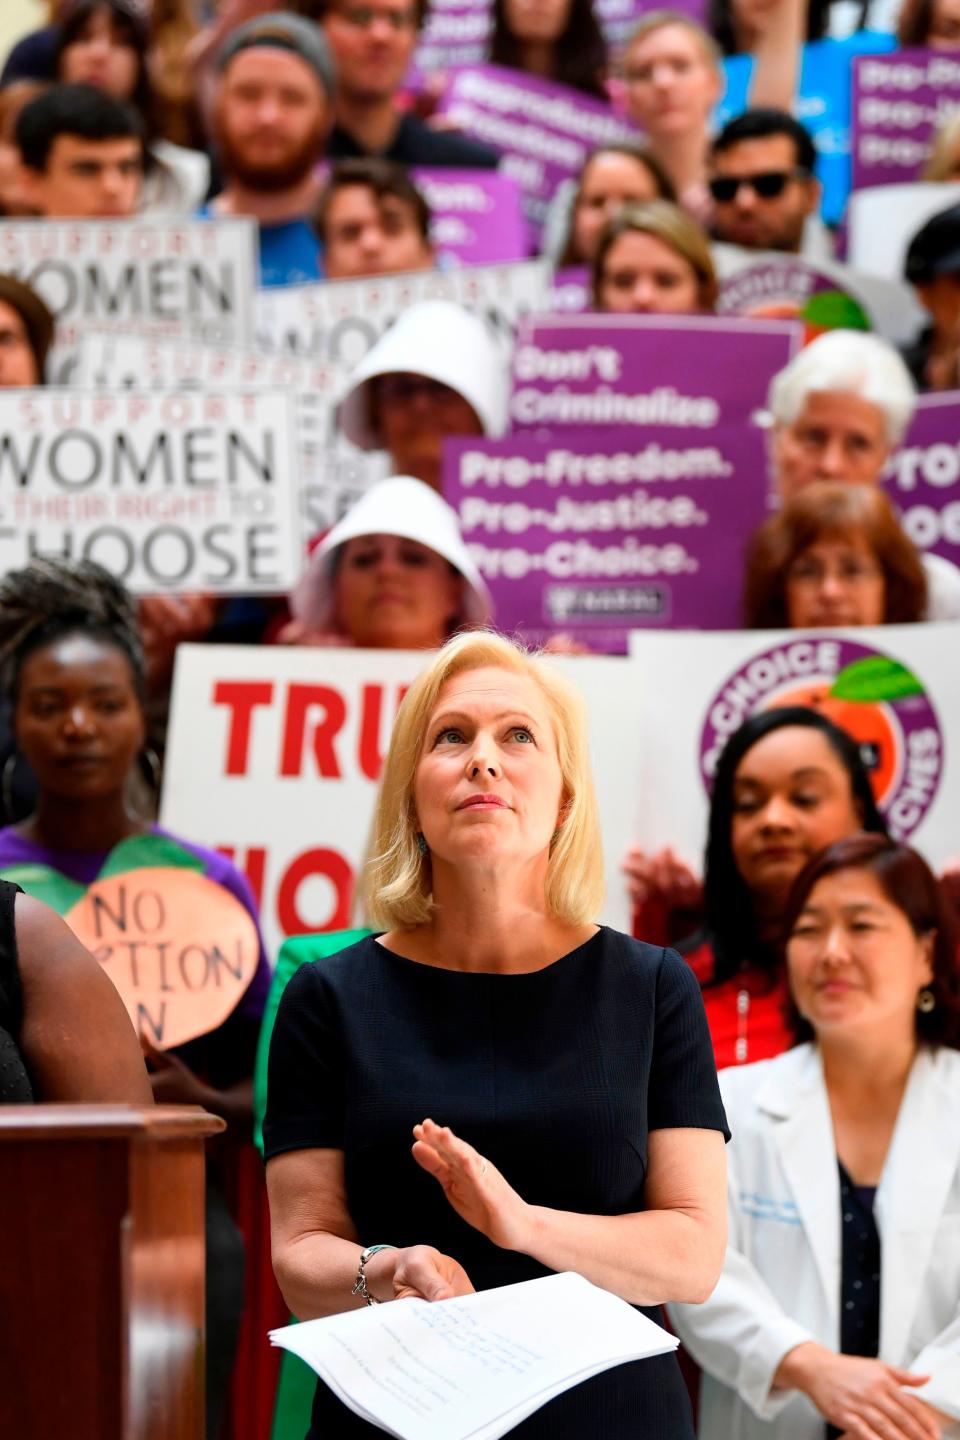 Democratic presidential candidate Sen. Kirsten Gillibrand (D-NY) attends an event at the Georgia State Capitol to speak out against the recently passed "heartbeat" bill on May 16, 2019 in Atlanta, Georgia. - The bill, which bans abortions after a fetal heartbeat is detected around six weeks, was signed on May 15 by Alabama Governor Kay Ivey. Under the new measure, expected to come into effect in six months, performing an abortion is a crime that could land doctors in prison for up to 99 years.